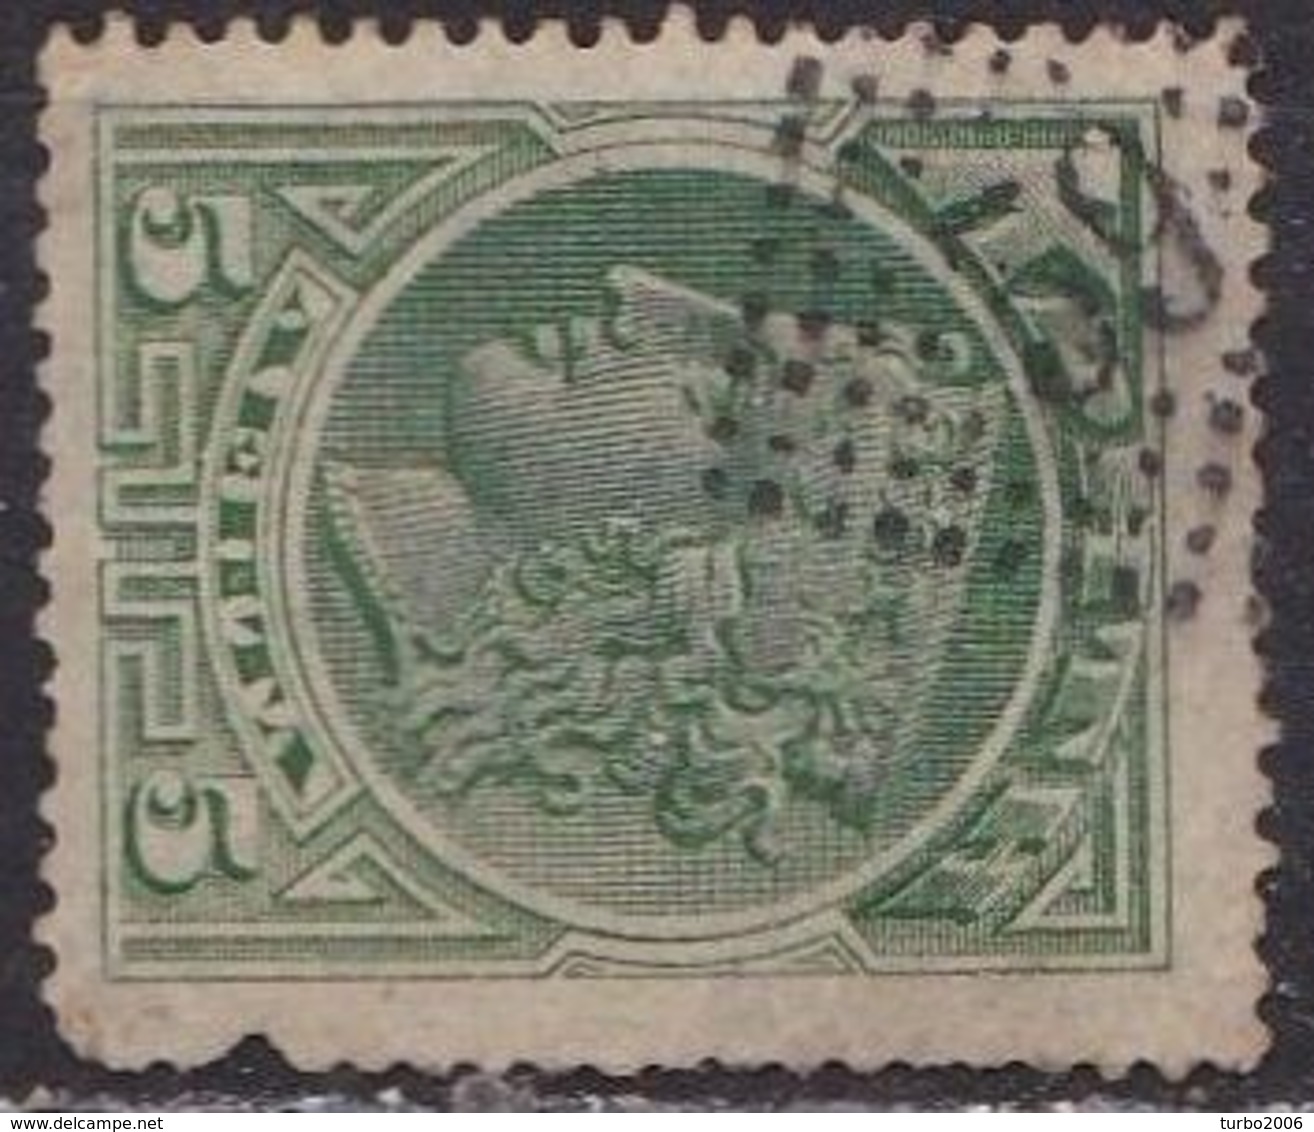 CRETE 1900 1st Issue Of The Cretan State 5 L. Green Vl. 2 With Dotted Rural Cancellation 59 (ΒΙΑΝΝΟΣ) - Crete